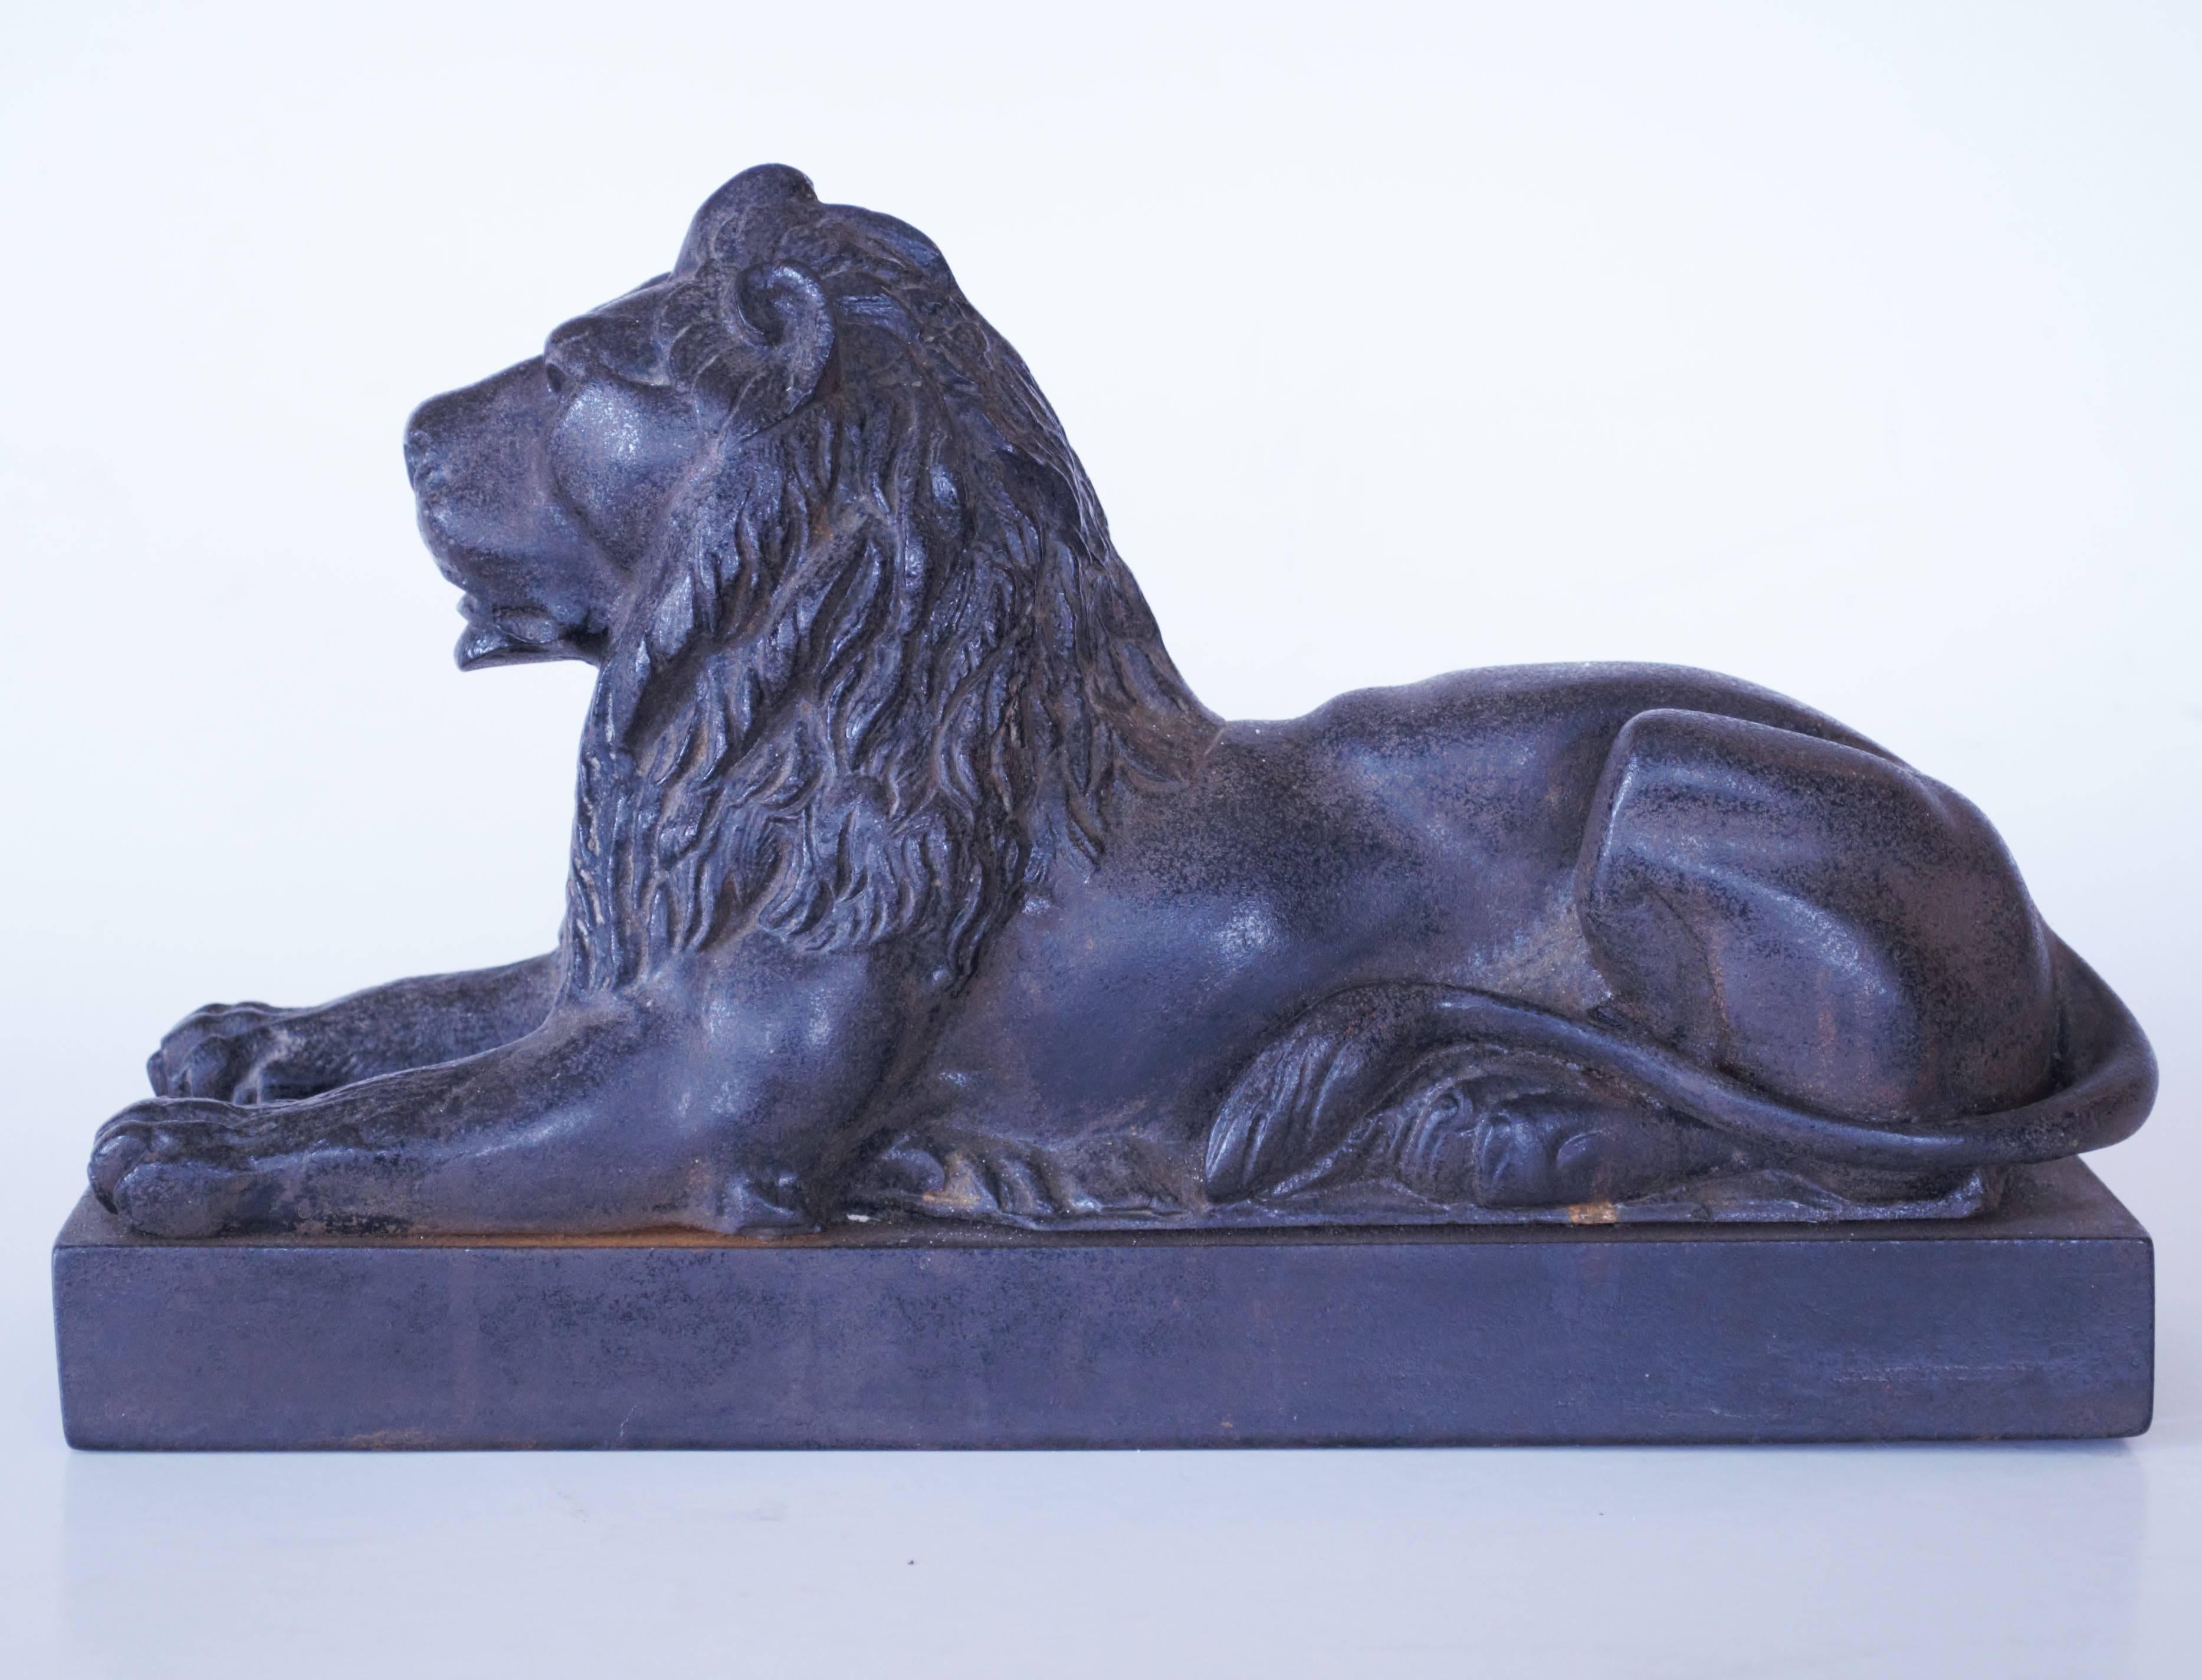 A pair of decorative 19th century cast iron reclining lions after the magnigicent original bronze pair by Sir Edwin Landseer displayed in Trafalgar Square.